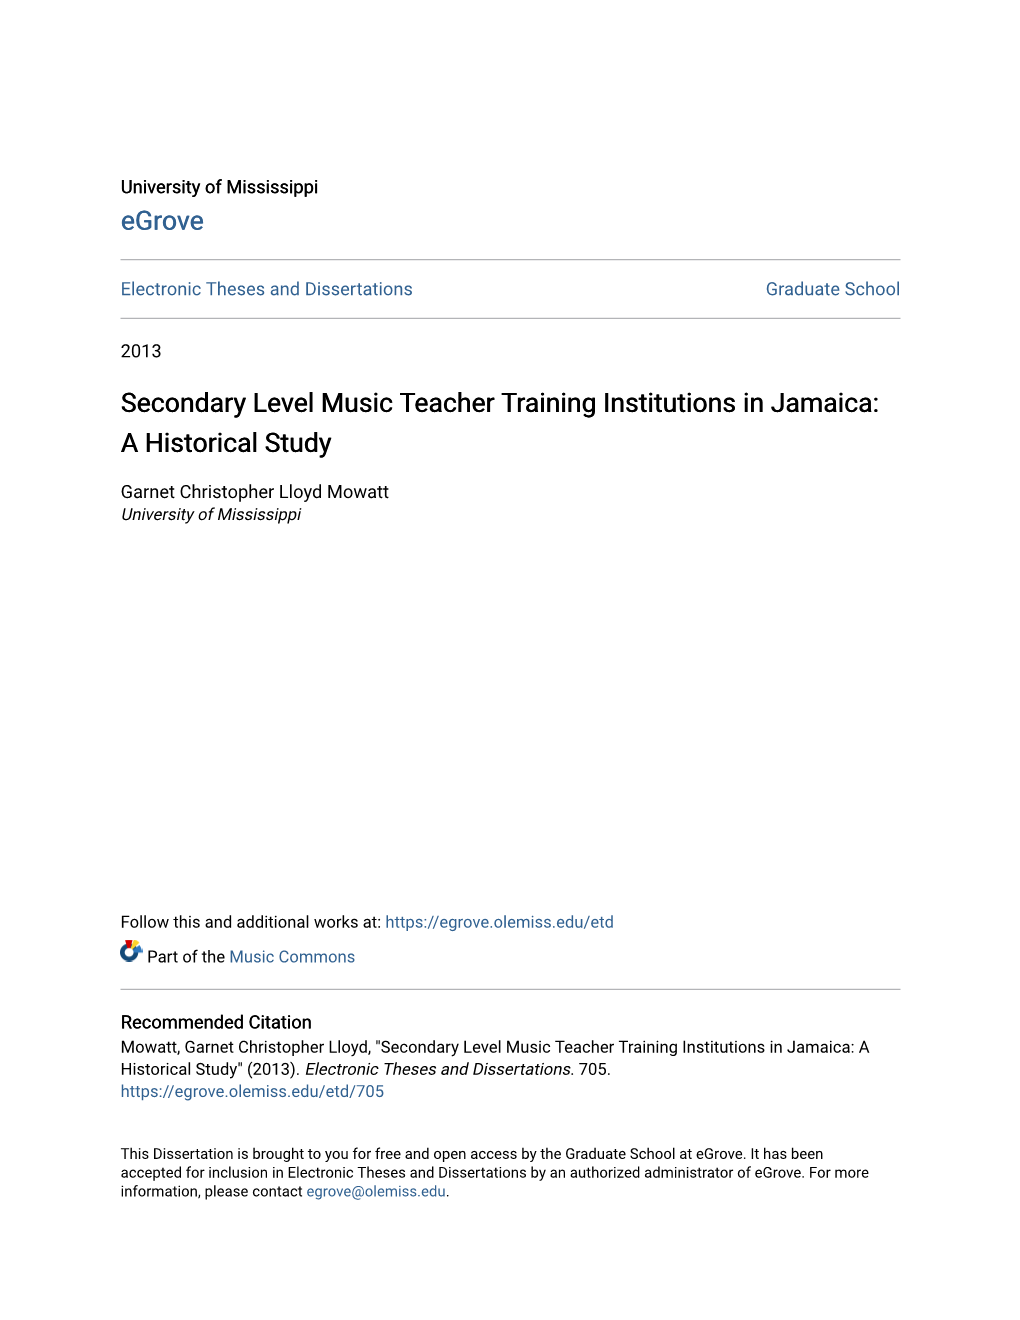 Secondary Level Music Teacher Training Institutions in Jamaica: a Historical Study